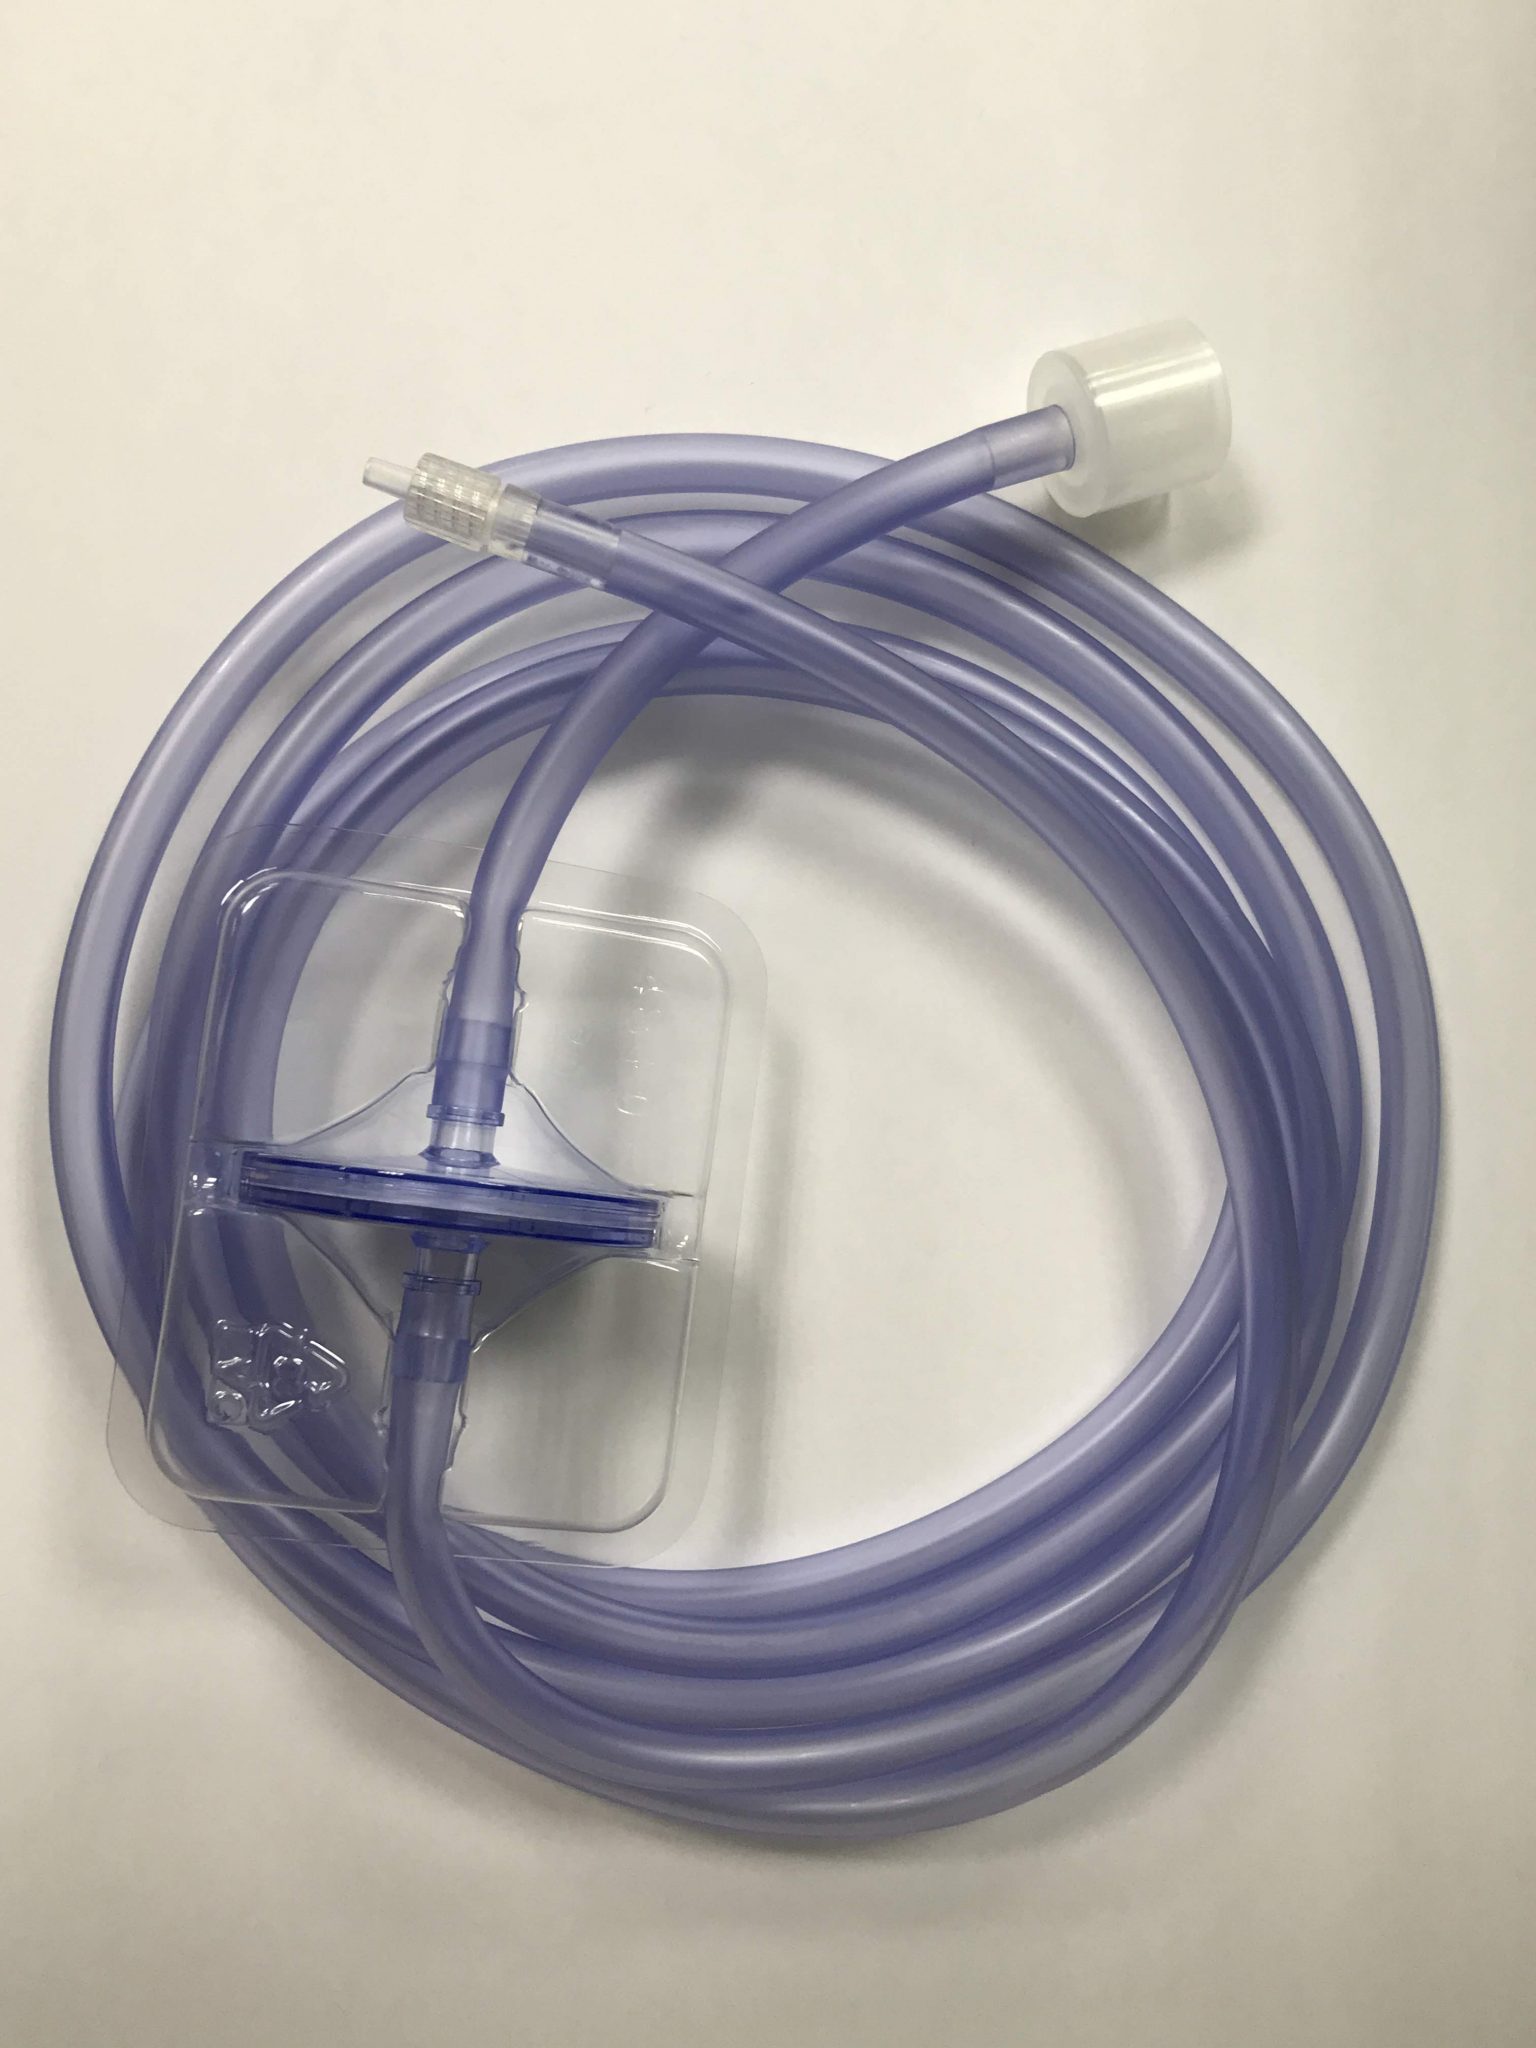 Insufflation Tubing Kits & Particulate Filters image